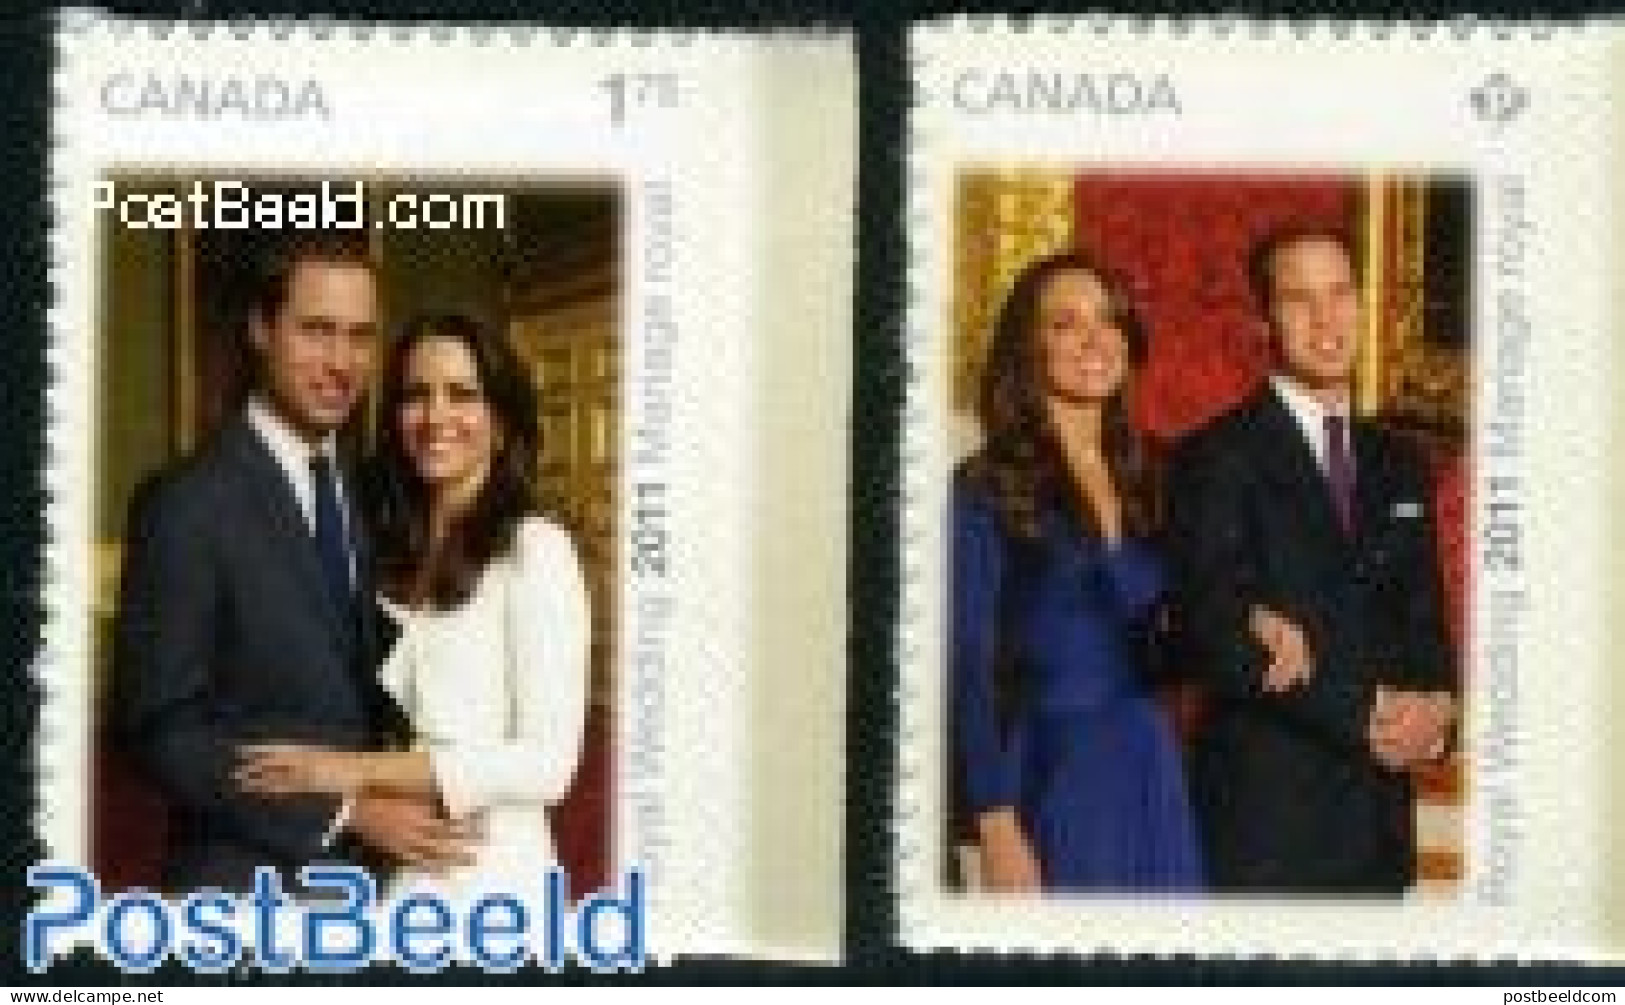 Canada 2011 William & Kate Wedding 2v S-a, Mint NH, History - Kings & Queens (Royalty) - Neufs